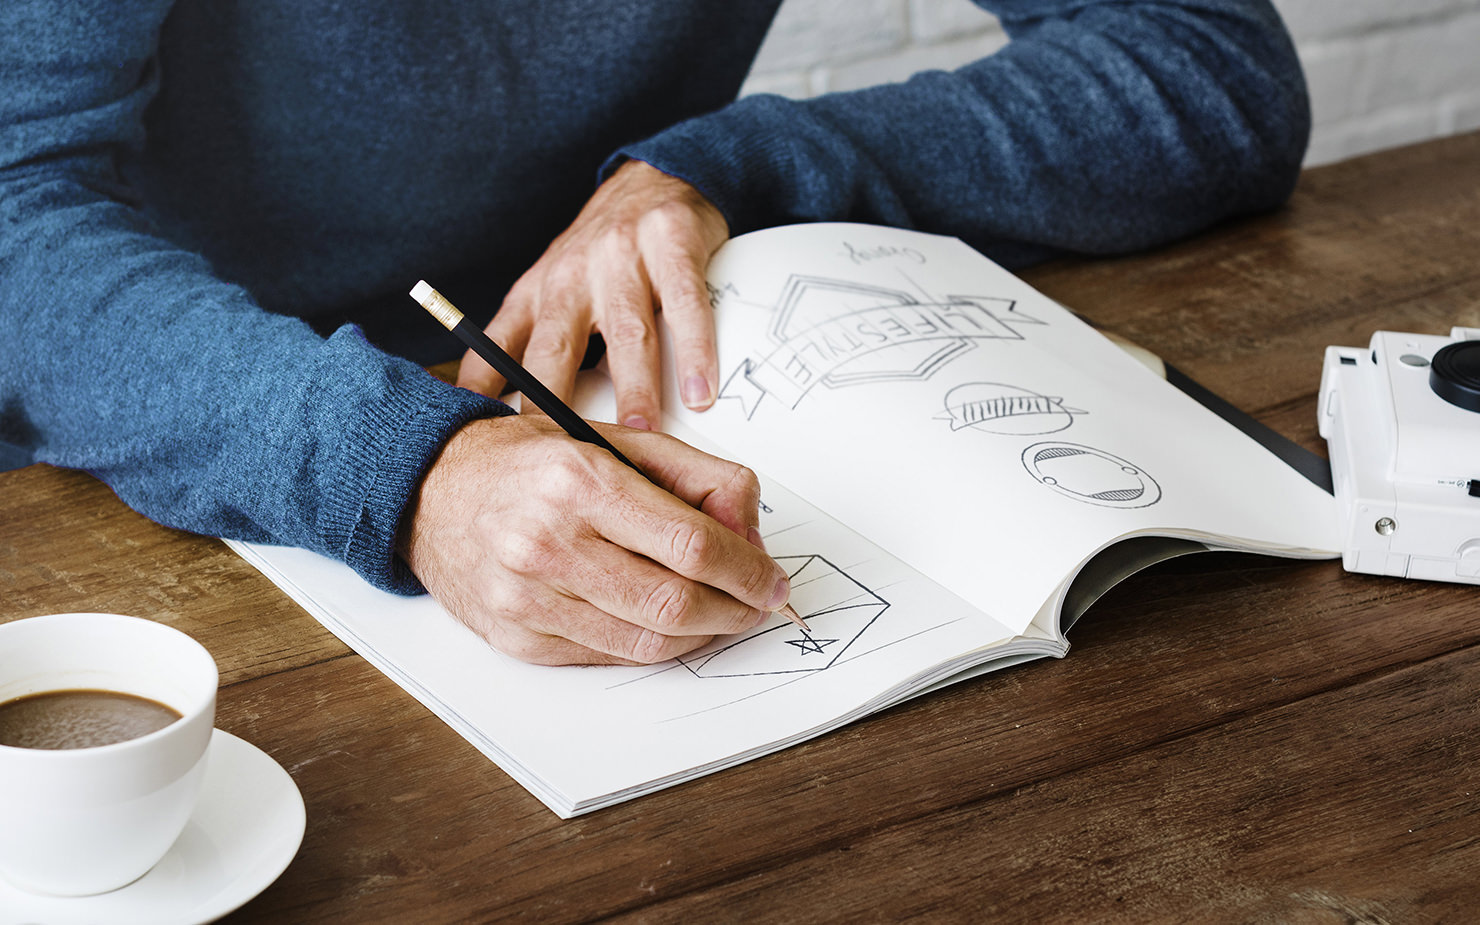 How to Draw People: 15 Tips on How to Draw a Person - Artists Network